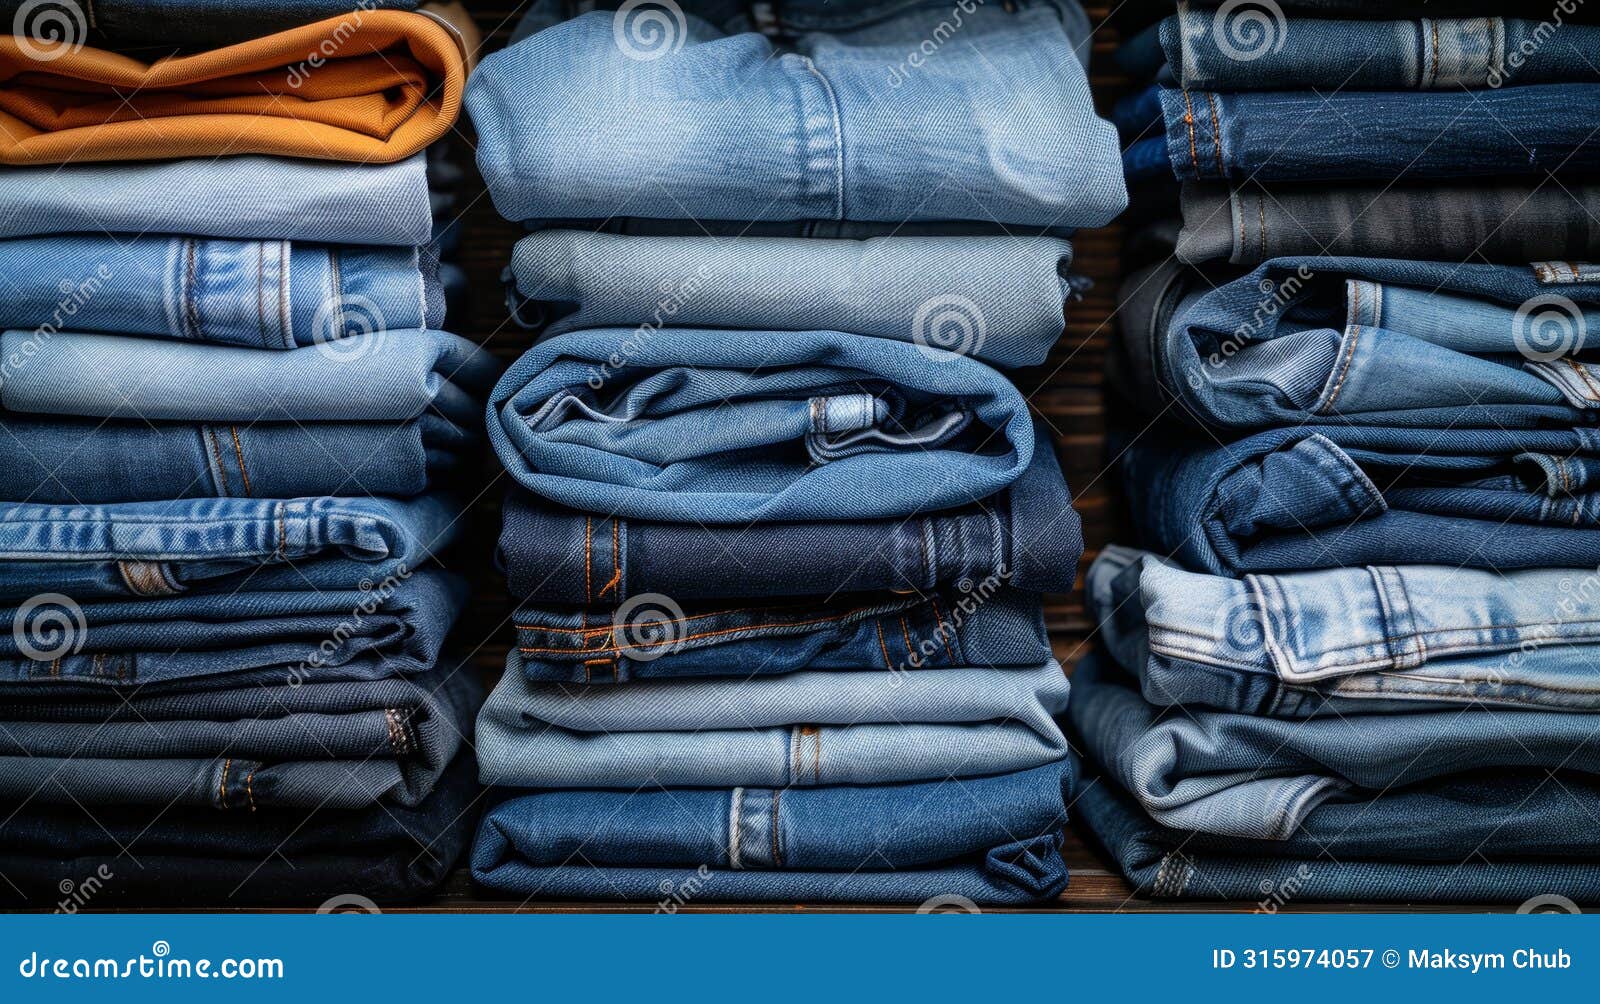 durable cotton twill fabric denim, known for diagonal ribbing, popular in jeans and casual wear